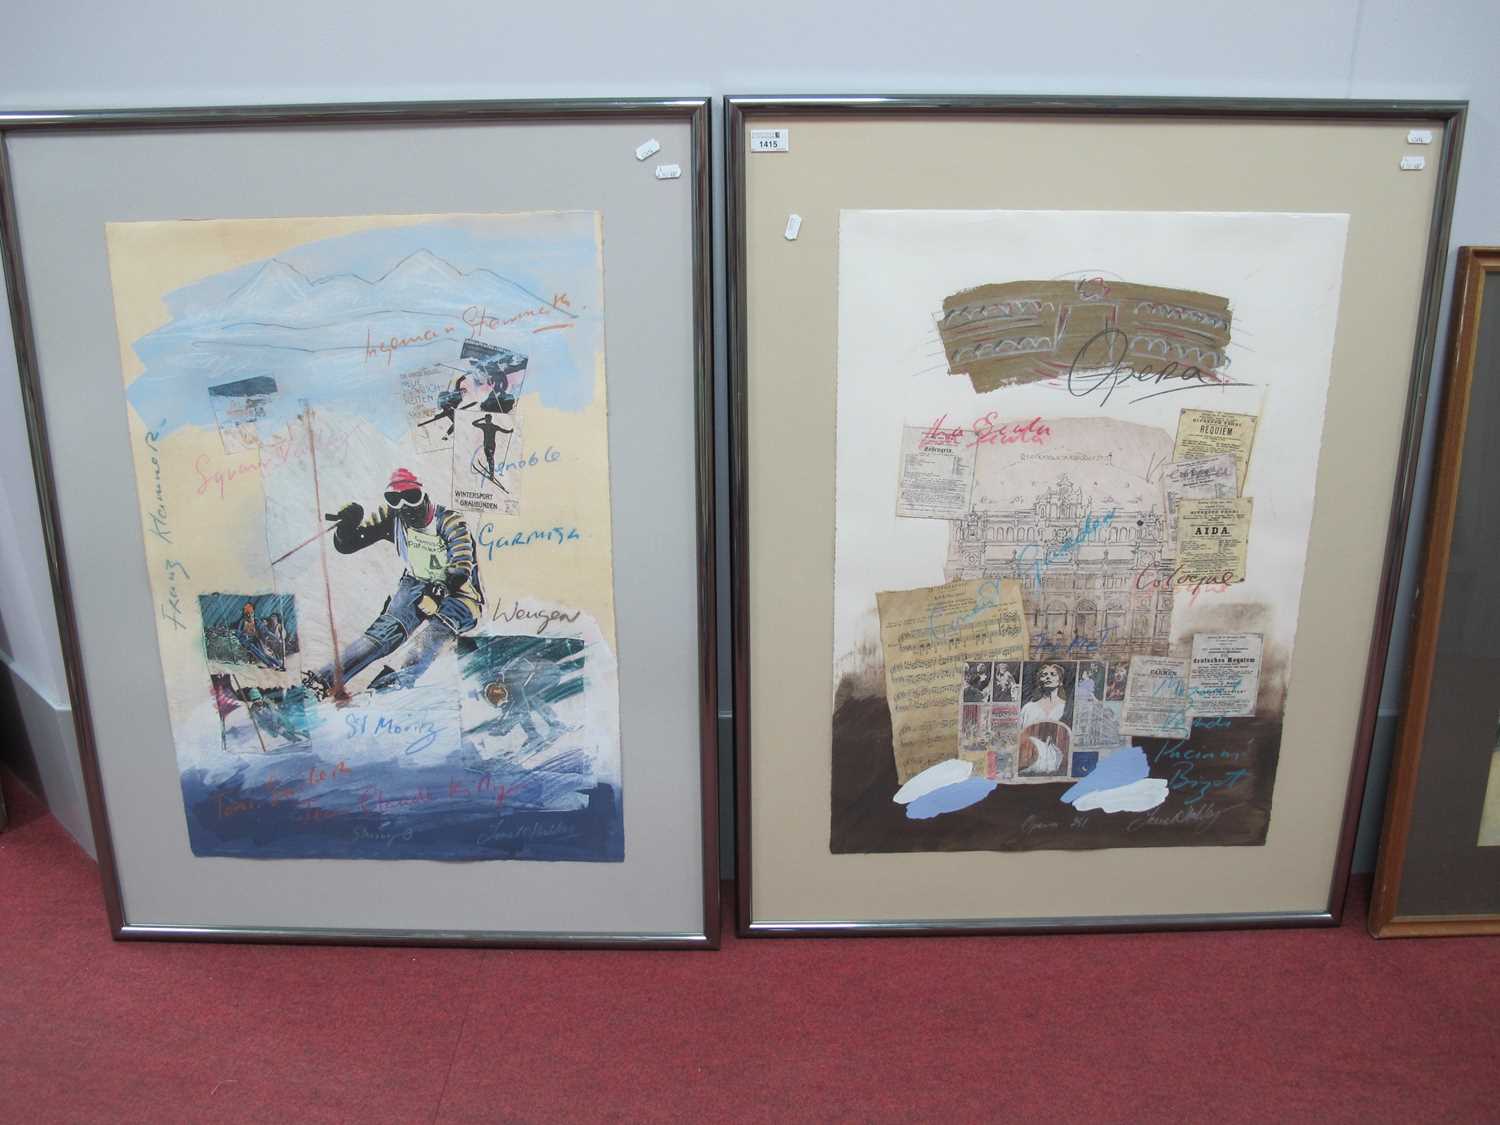 James Hussey, 'Sting 3' and 'Opera 251', a pair of collage style prints, both signed lower right, 75